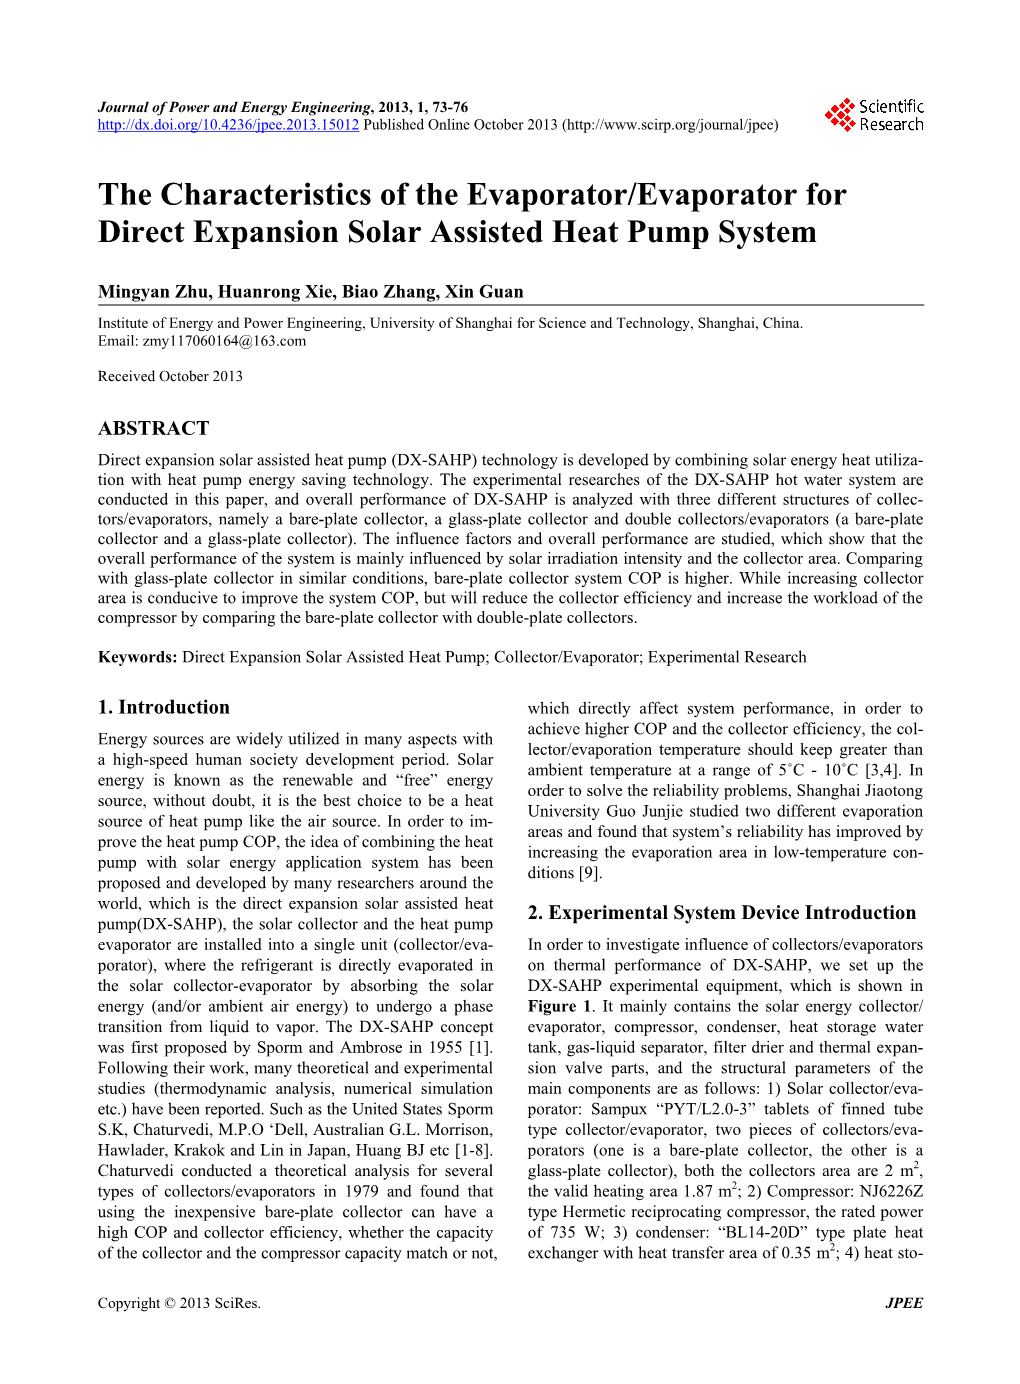 The Characteristics of the Evaporator/Evaporator for Direct Expansion Solar Assisted Heat Pump System